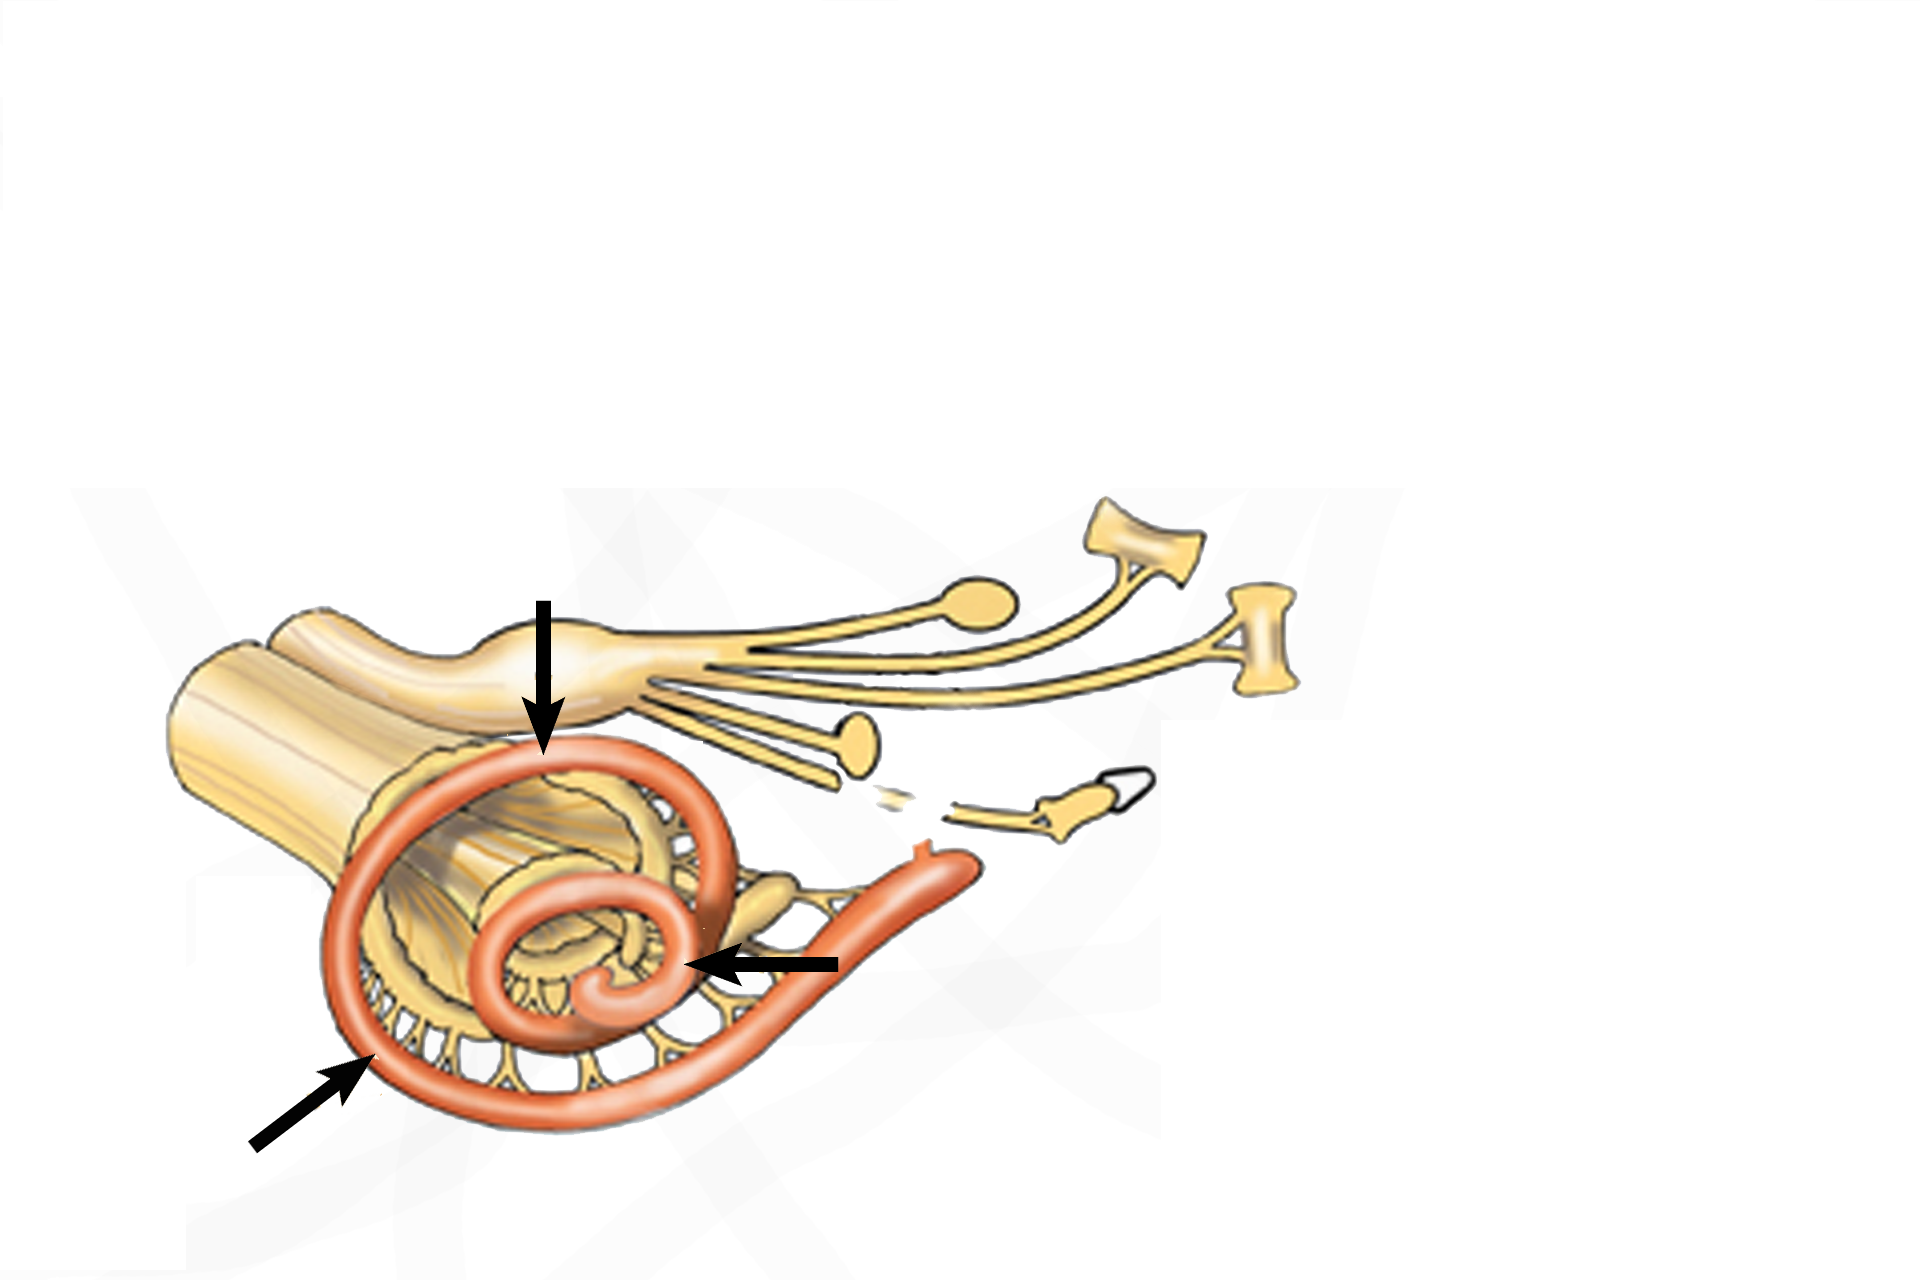 Organ of Corti > <p>The organ of Corti, the receptor for sound, is located in the cochlear duct (arrows) of the membranous labyrinth.  The cochlear duct is suspended in the middle of the tubular osseous cochlea.</p>
